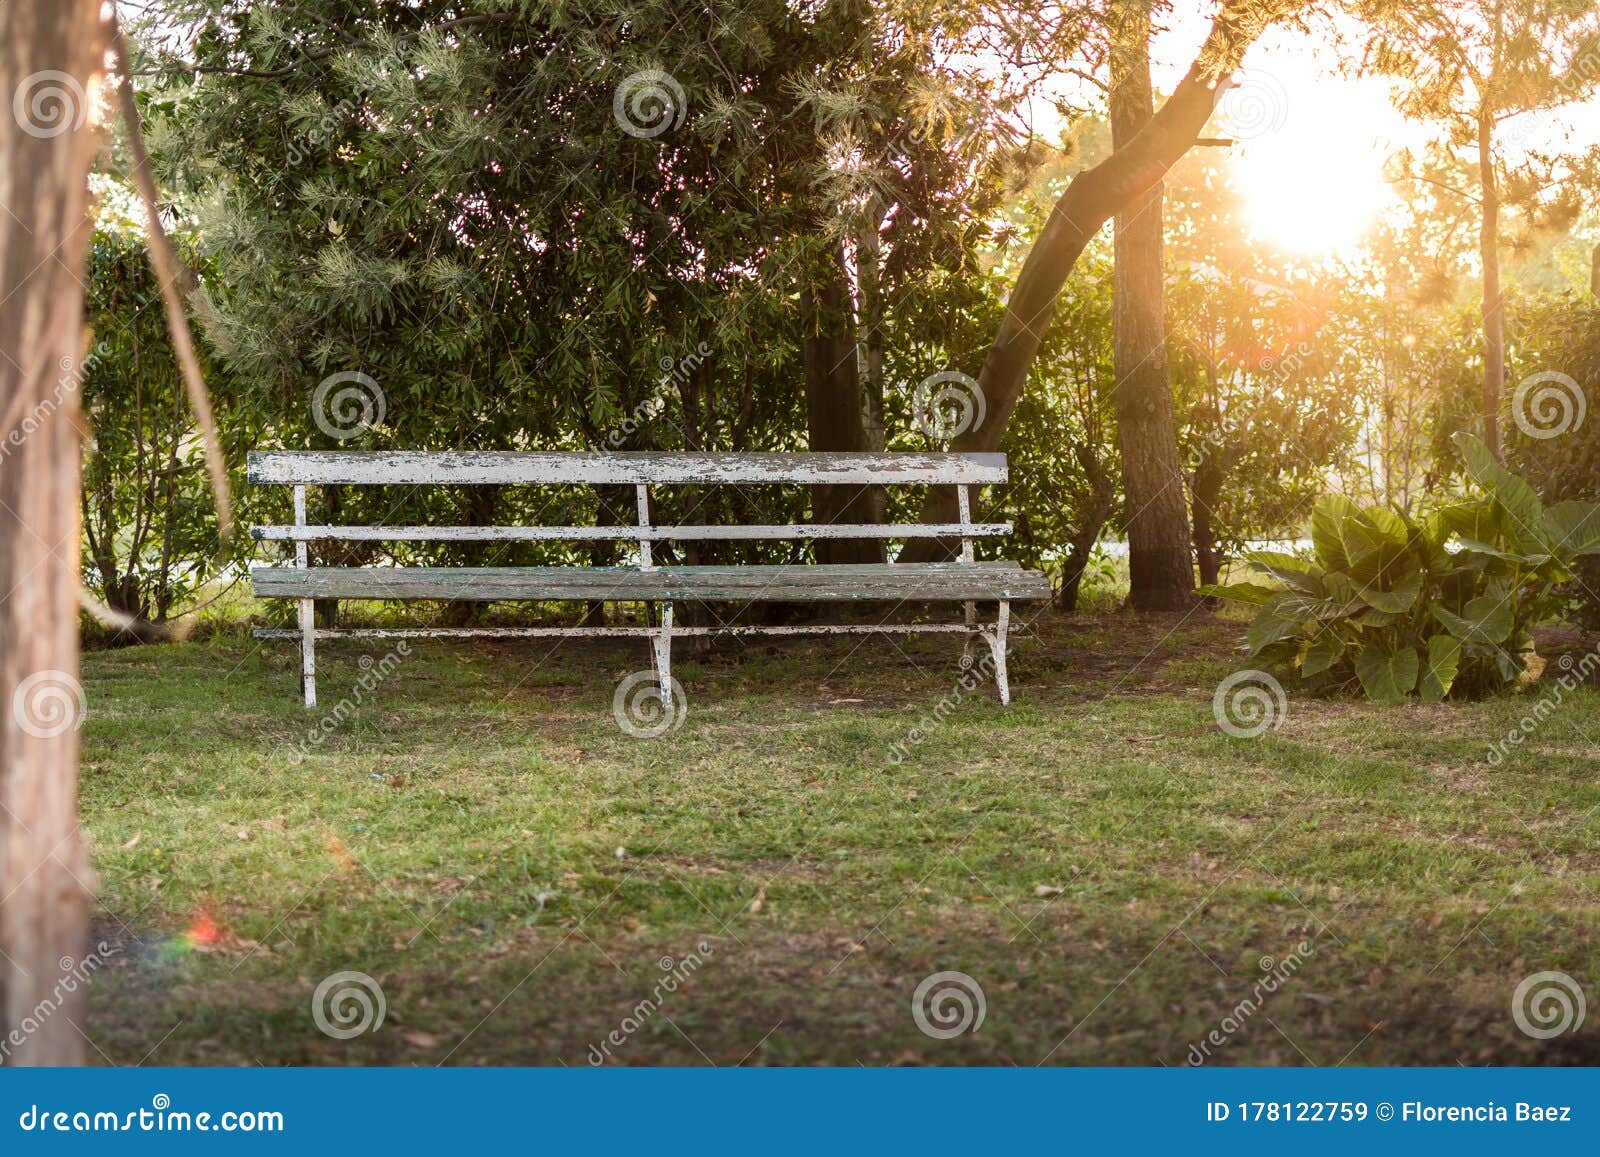 stock photo of empty bank in a garden during a sunset with an amazing light